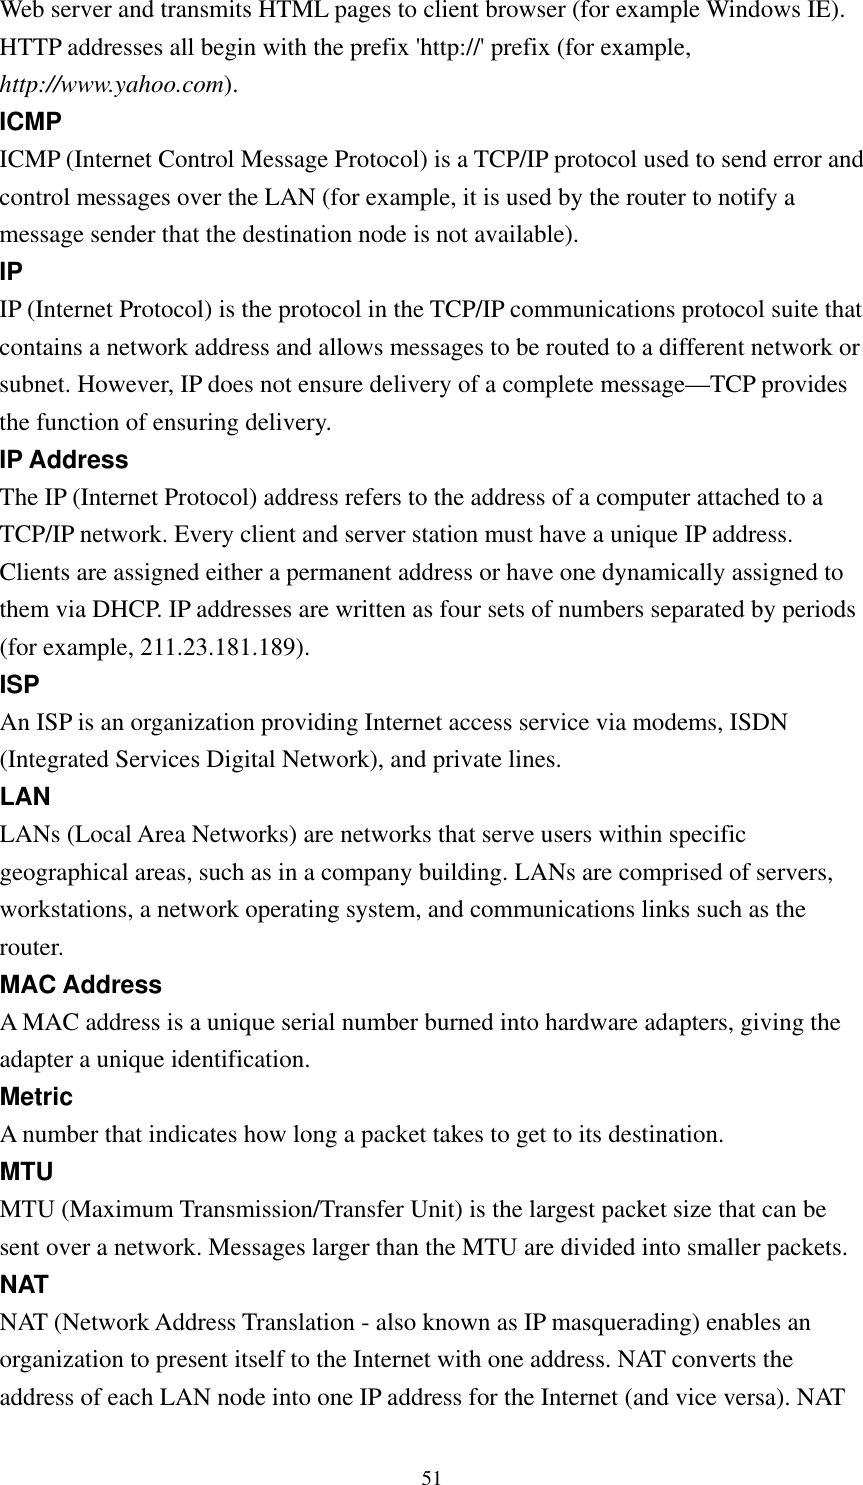  51Web server and transmits HTML pages to client browser (for example Windows IE). HTTP addresses all begin with the prefix &apos;http://&apos; prefix (for example, http://www.yahoo.com). ICMP ICMP (Internet Control Message Protocol) is a TCP/IP protocol used to send error and control messages over the LAN (for example, it is used by the router to notify a message sender that the destination node is not available). IP IP (Internet Protocol) is the protocol in the TCP/IP communications protocol suite that contains a network address and allows messages to be routed to a different network or subnet. However, IP does not ensure delivery of a complete message—TCP provides the function of ensuring delivery. IP Address The IP (Internet Protocol) address refers to the address of a computer attached to a TCP/IP network. Every client and server station must have a unique IP address. Clients are assigned either a permanent address or have one dynamically assigned to them via DHCP. IP addresses are written as four sets of numbers separated by periods (for example, 211.23.181.189). ISP An ISP is an organization providing Internet access service via modems, ISDN (Integrated Services Digital Network), and private lines. LAN LANs (Local Area Networks) are networks that serve users within specific geographical areas, such as in a company building. LANs are comprised of servers, workstations, a network operating system, and communications links such as the router. MAC Address A MAC address is a unique serial number burned into hardware adapters, giving the adapter a unique identification. Metric A number that indicates how long a packet takes to get to its destination. MTU MTU (Maximum Transmission/Transfer Unit) is the largest packet size that can be sent over a network. Messages larger than the MTU are divided into smaller packets. NAT NAT (Network Address Translation - also known as IP masquerading) enables an organization to present itself to the Internet with one address. NAT converts the address of each LAN node into one IP address for the Internet (and vice versa). NAT 